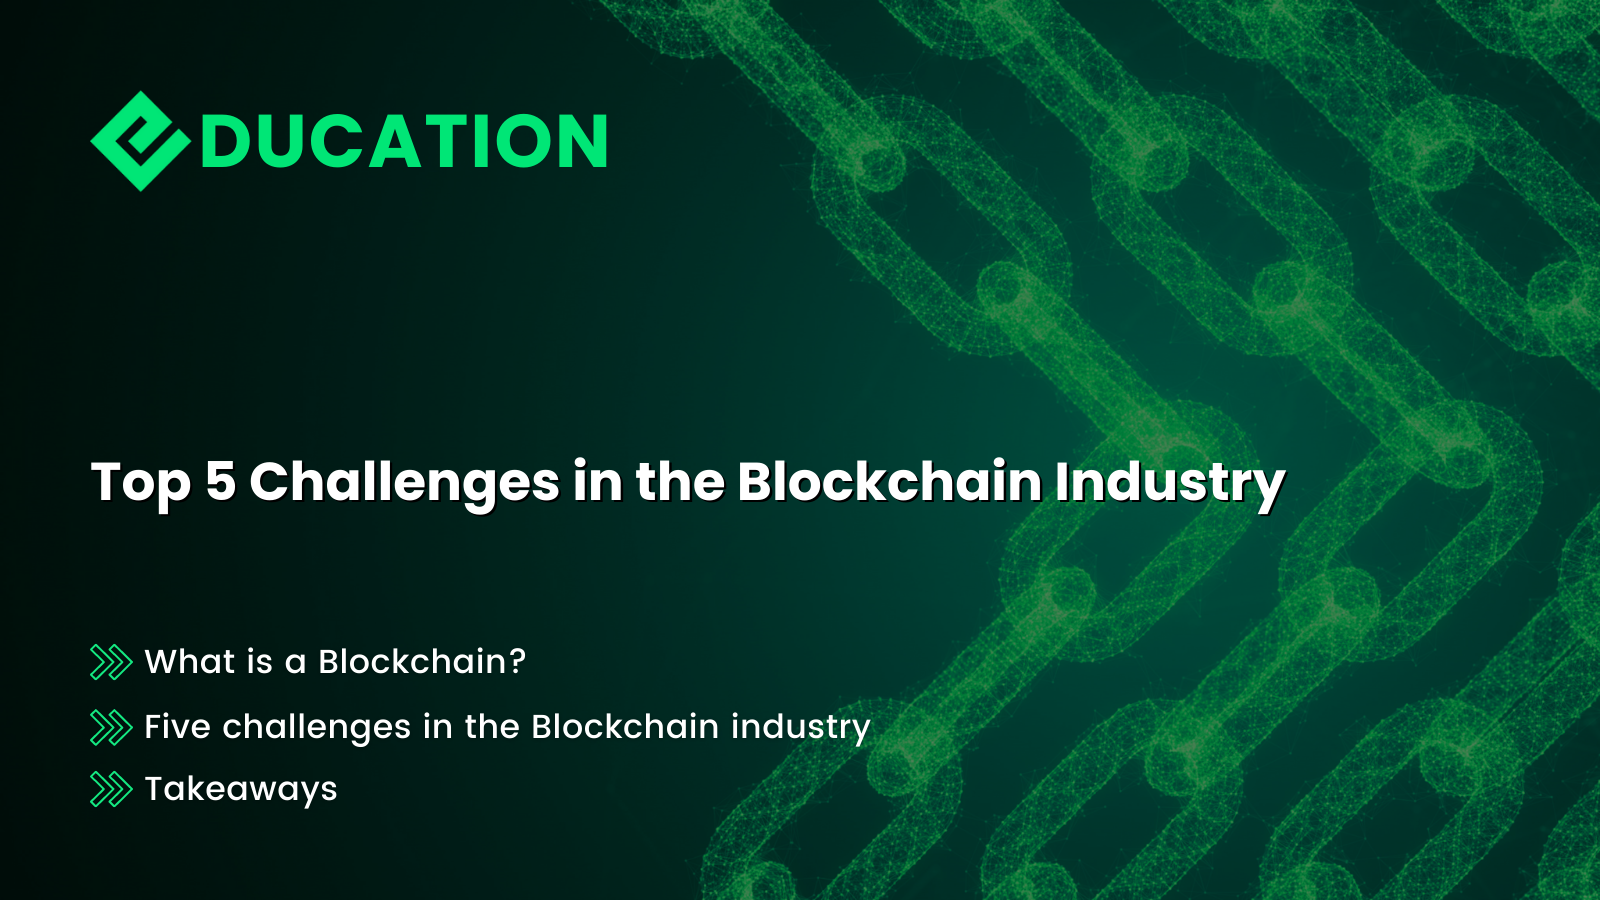 Cover image presenting top 5 challenges in the blockchain industry